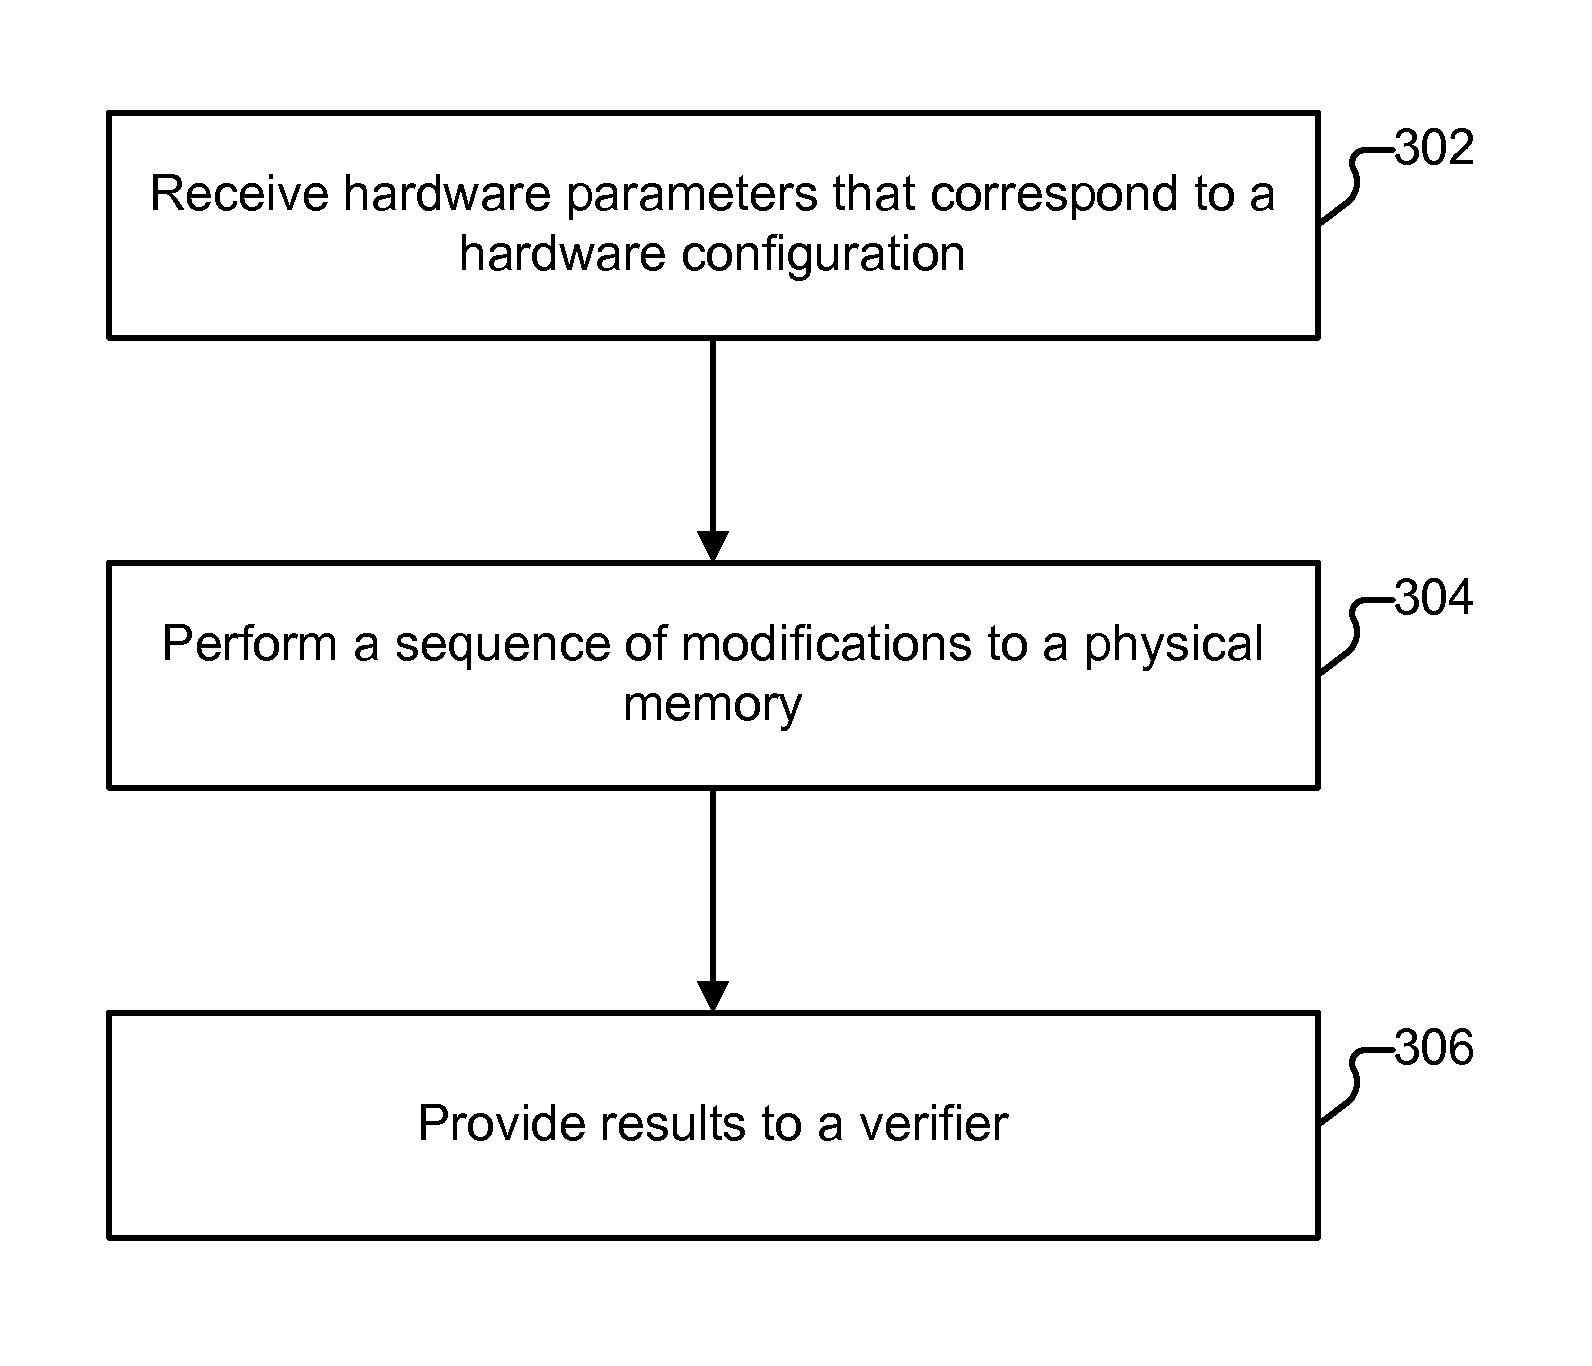 Auditing a device